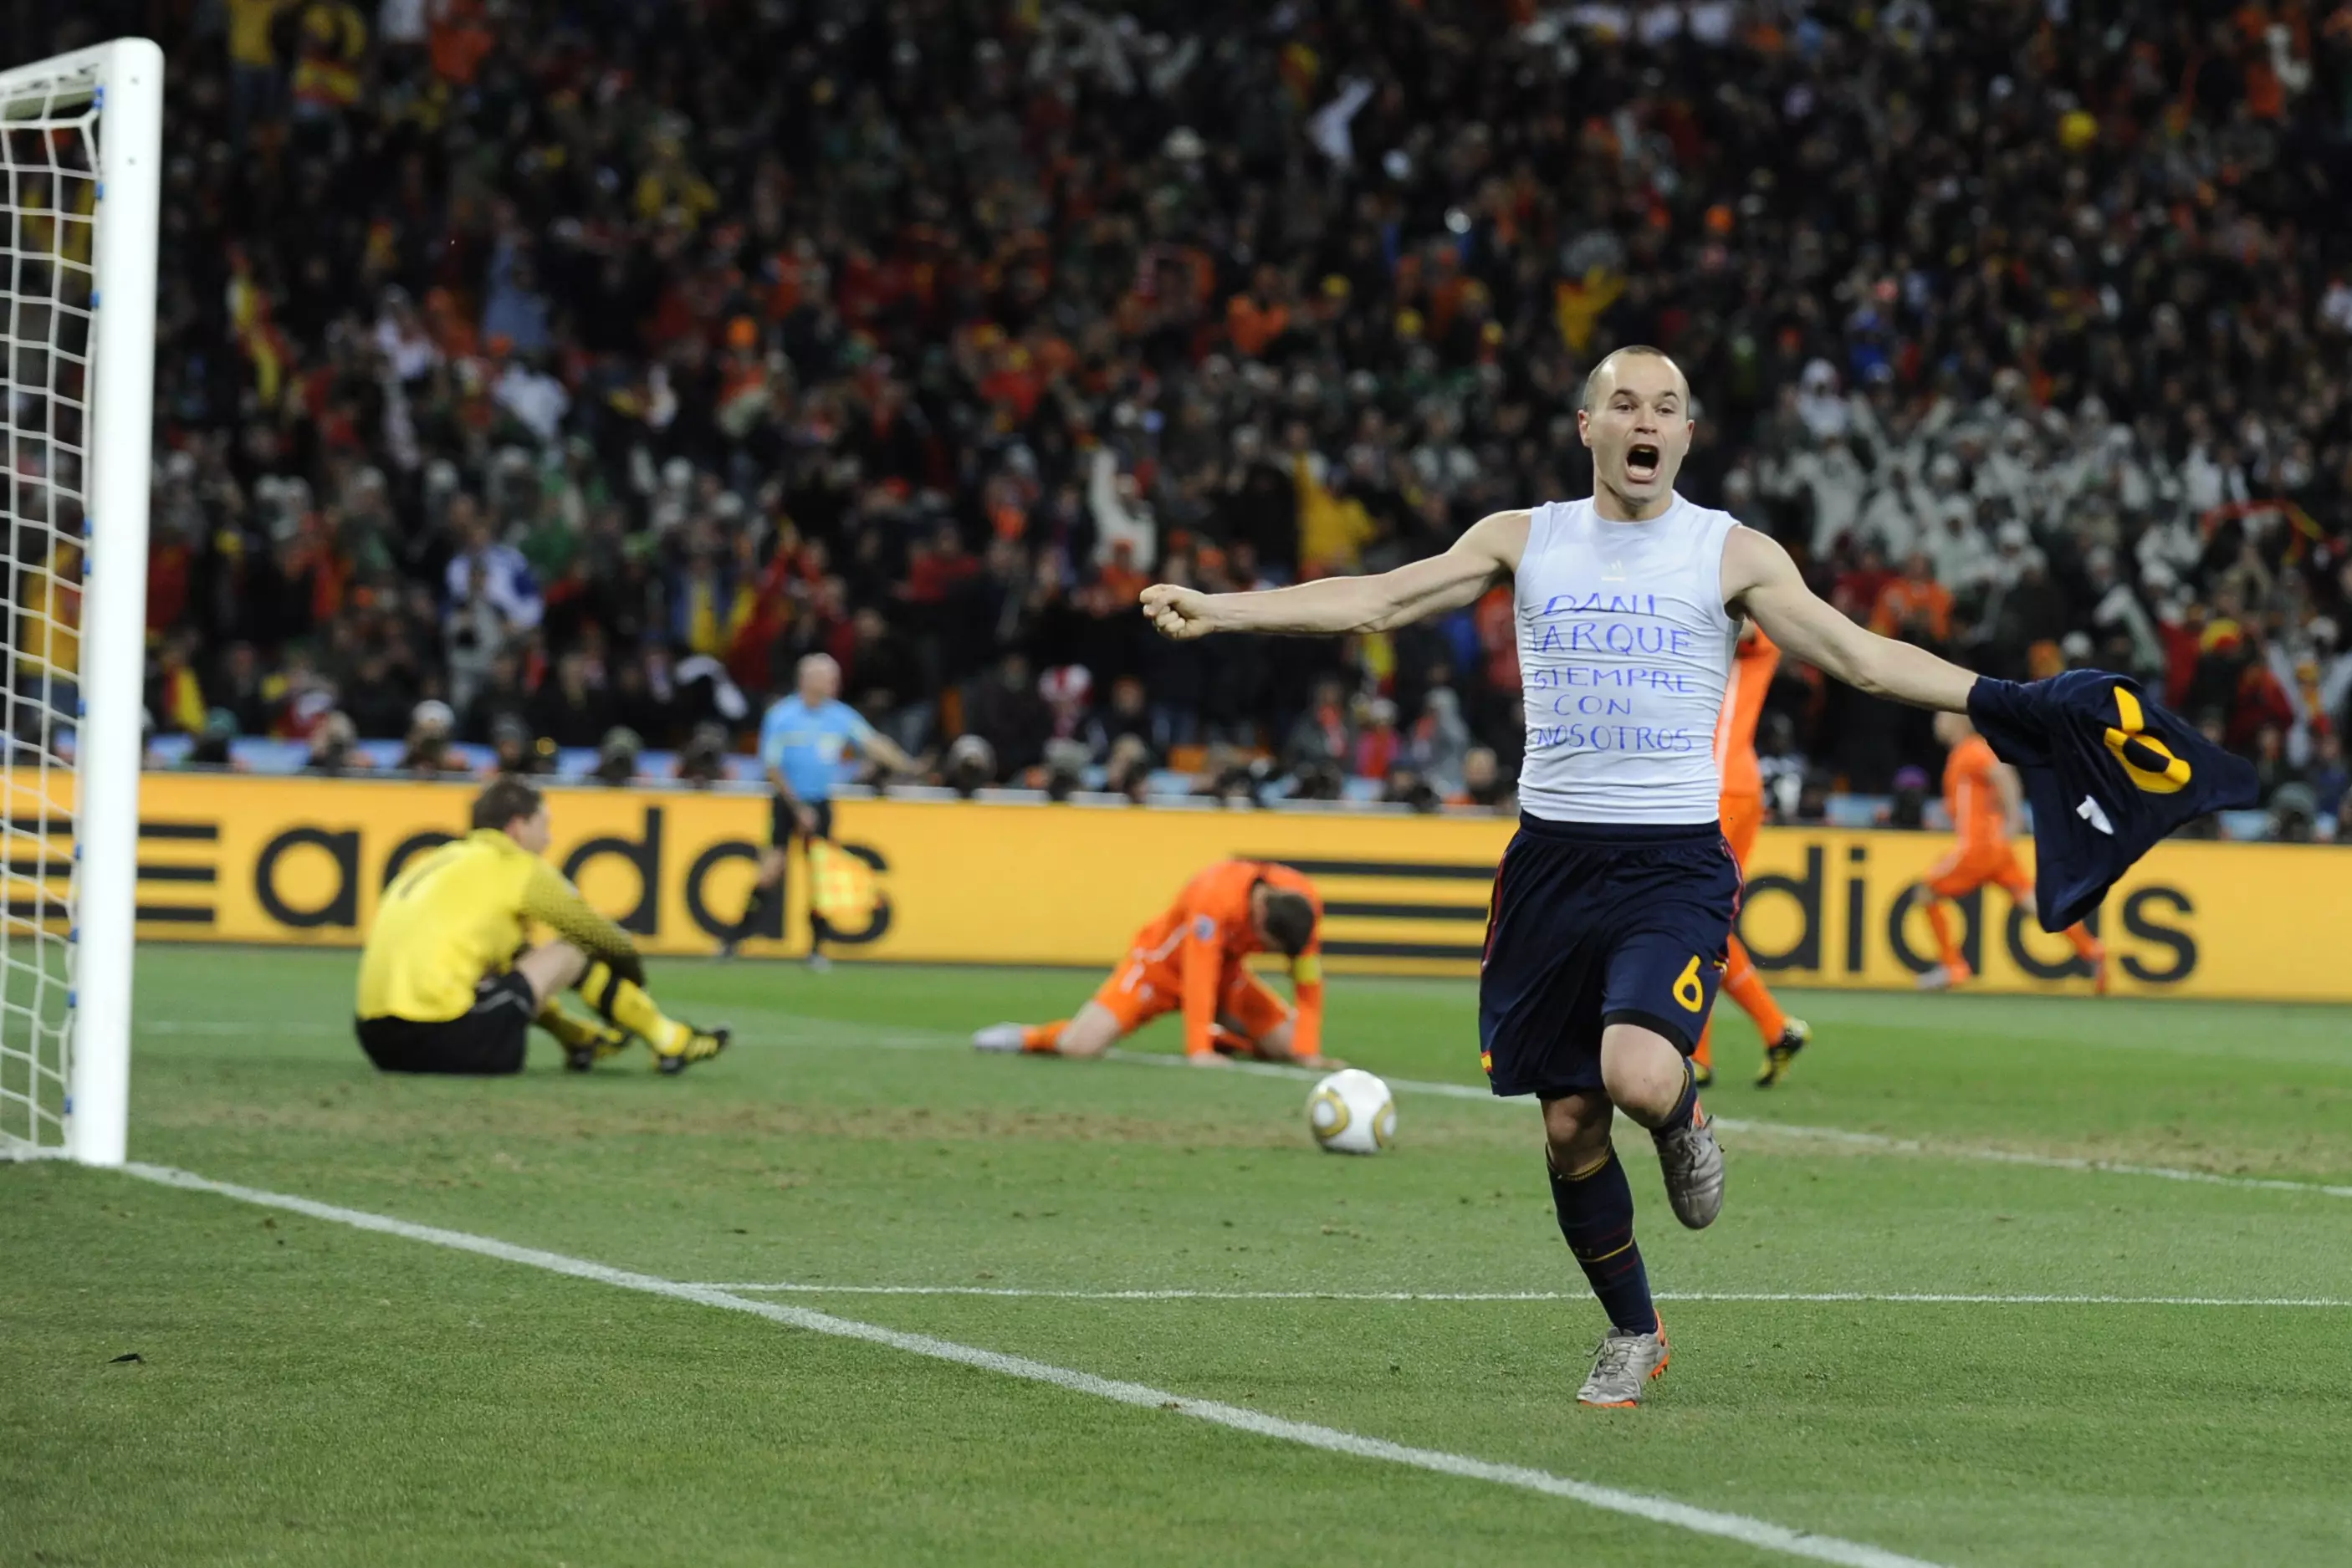 Iniesta wheels away in celebration after scoring in the World Cup final. Image: PA